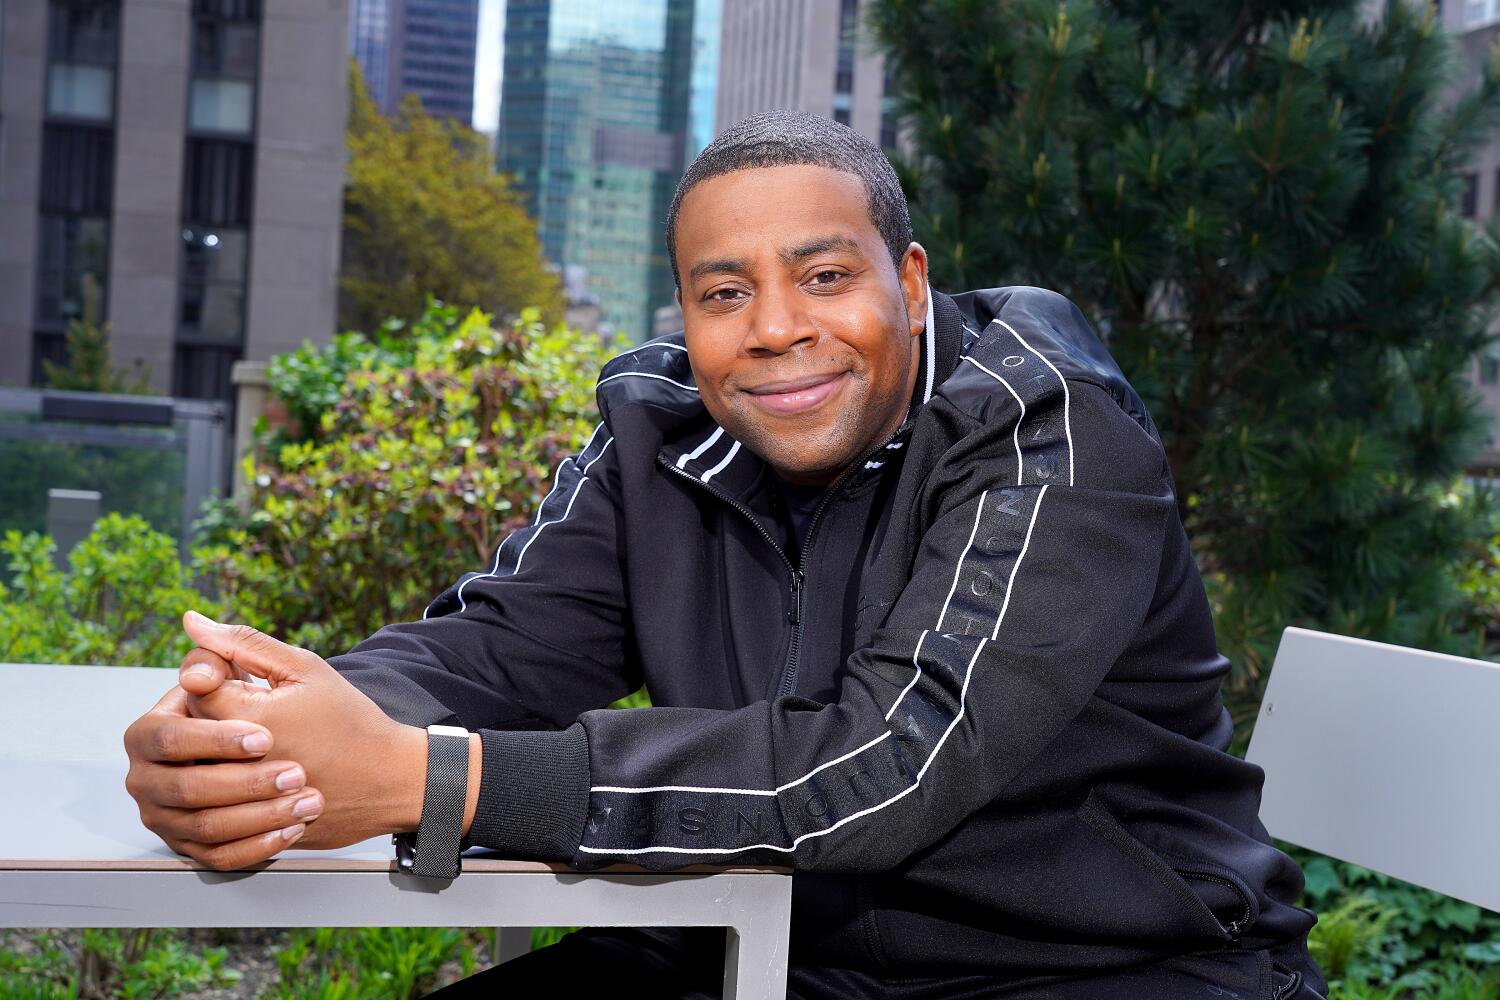 Amid 'Quiet on Set' fallout, Kenan Thompson says sets for kids shows should 'be a safe place'